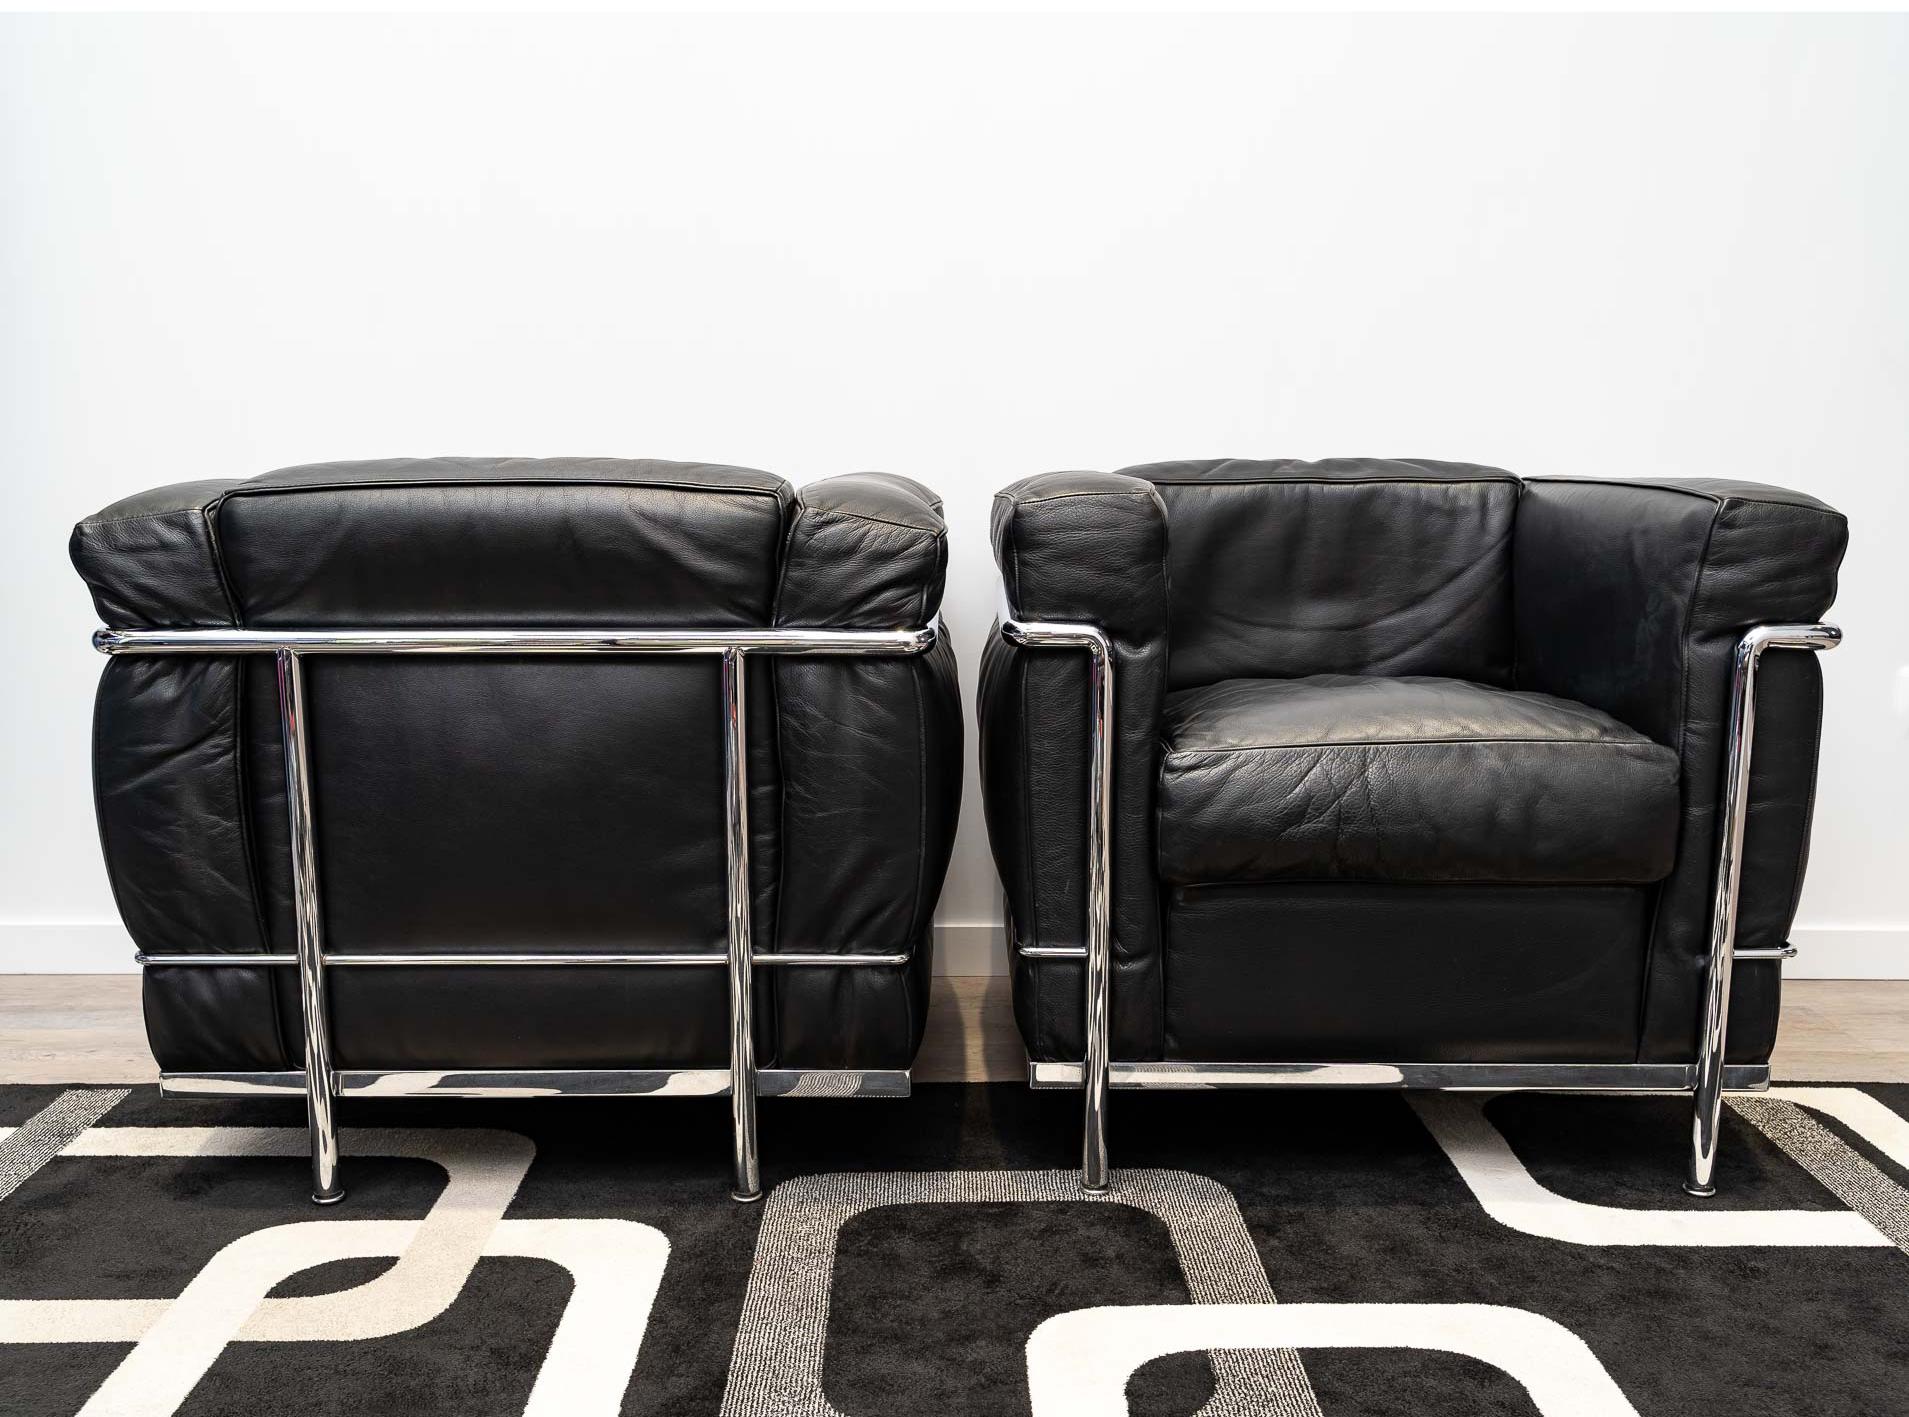 Pair of authentic LC2, designed by Le Corbusier, Perriand and Jeanneret in 1928.
Cassina edition in black leather, polyurethane foam padding.
Engraved serial numbers and Cassina signature.

Very good condition, superb vintage patina.
The asking